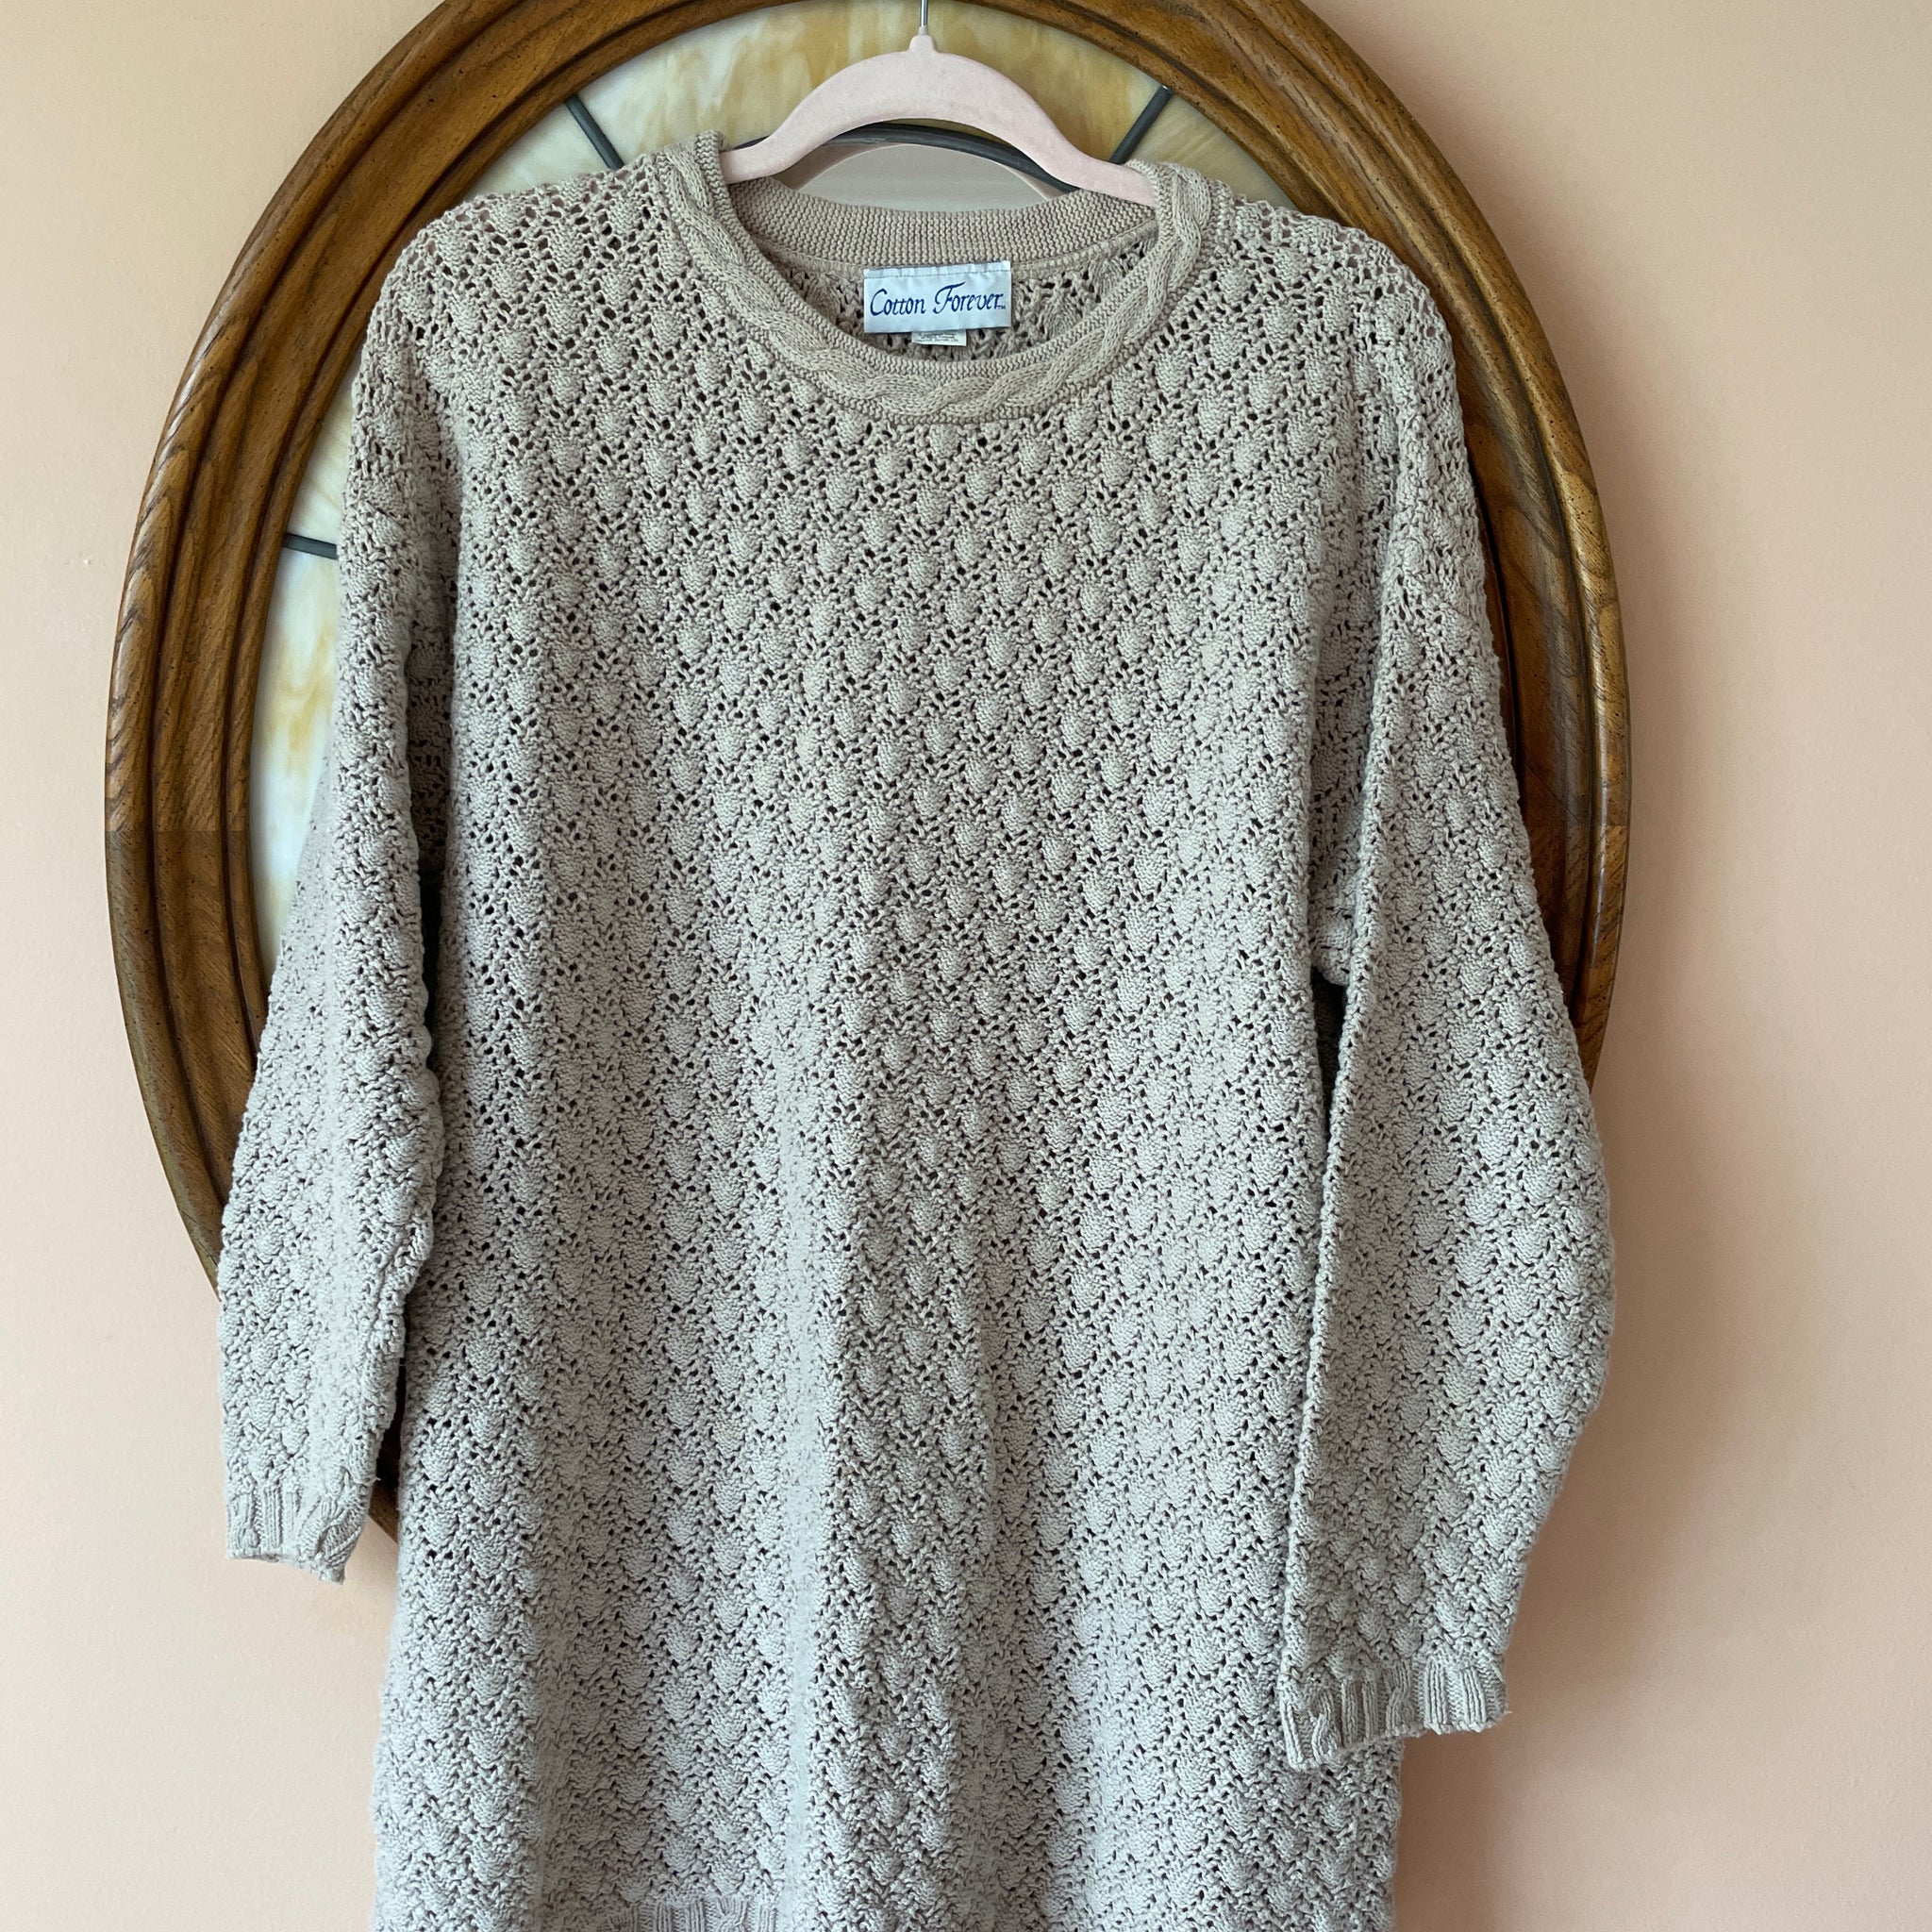 90s cotton knit sweater 